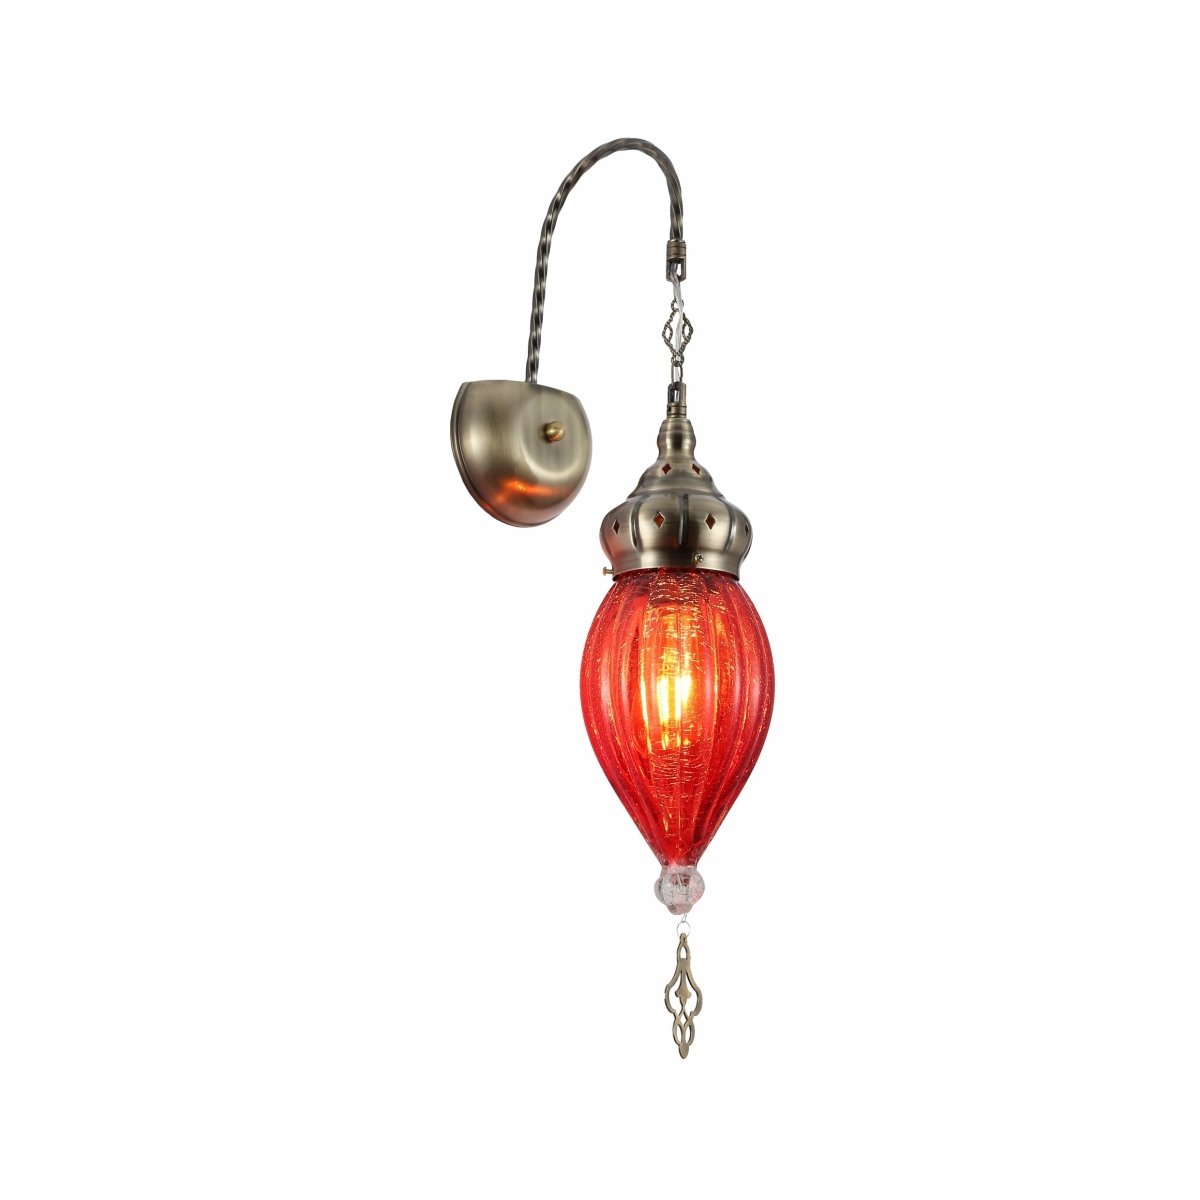 Main image of Moroccan Style Antique Brass and Red Glass Oriental Wall Light E27 | TEKLED 151-19458